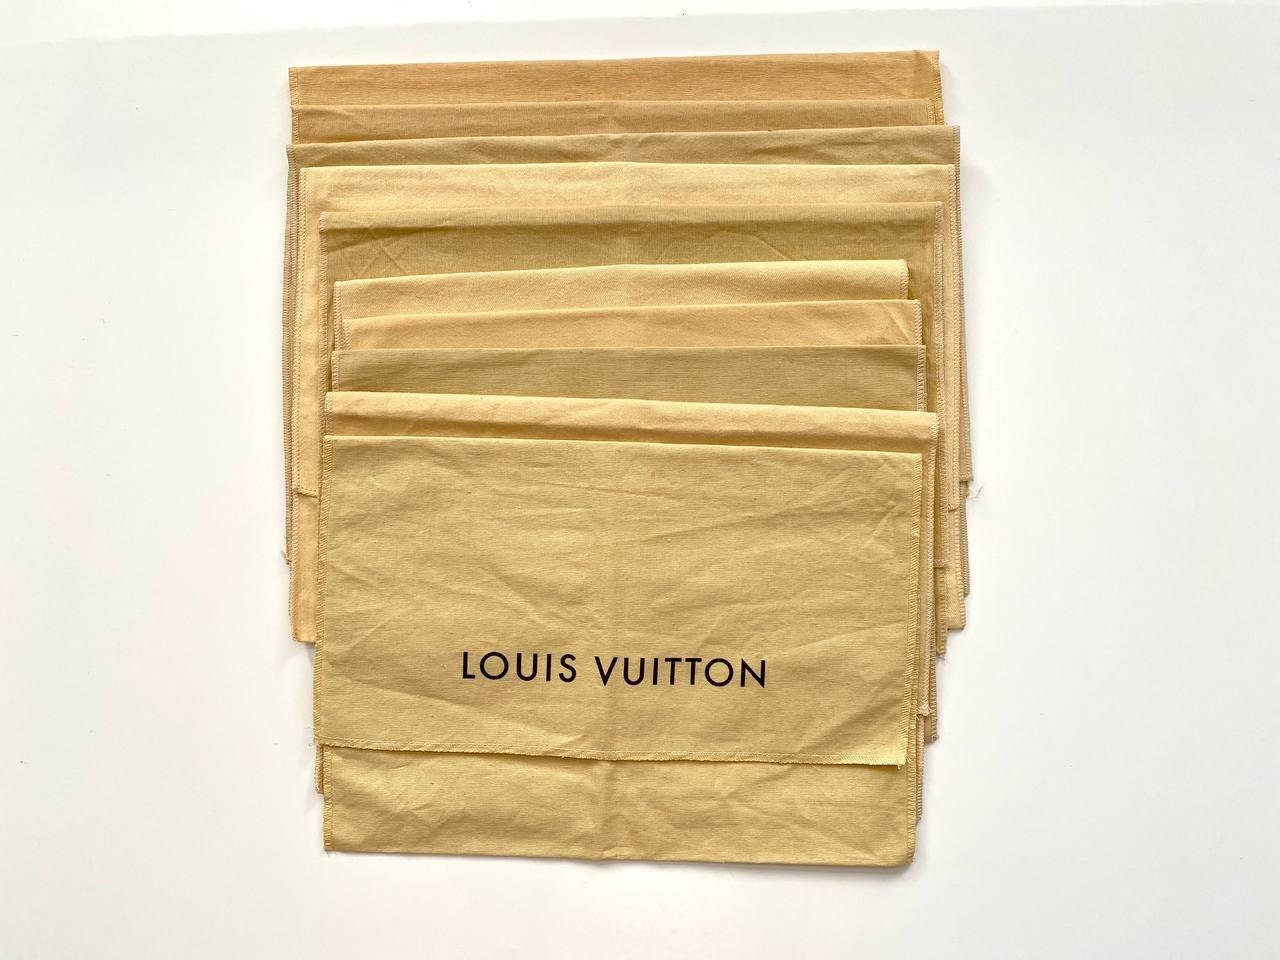 Authentic Louis Vuitton dust covers - clothing & accessories - by